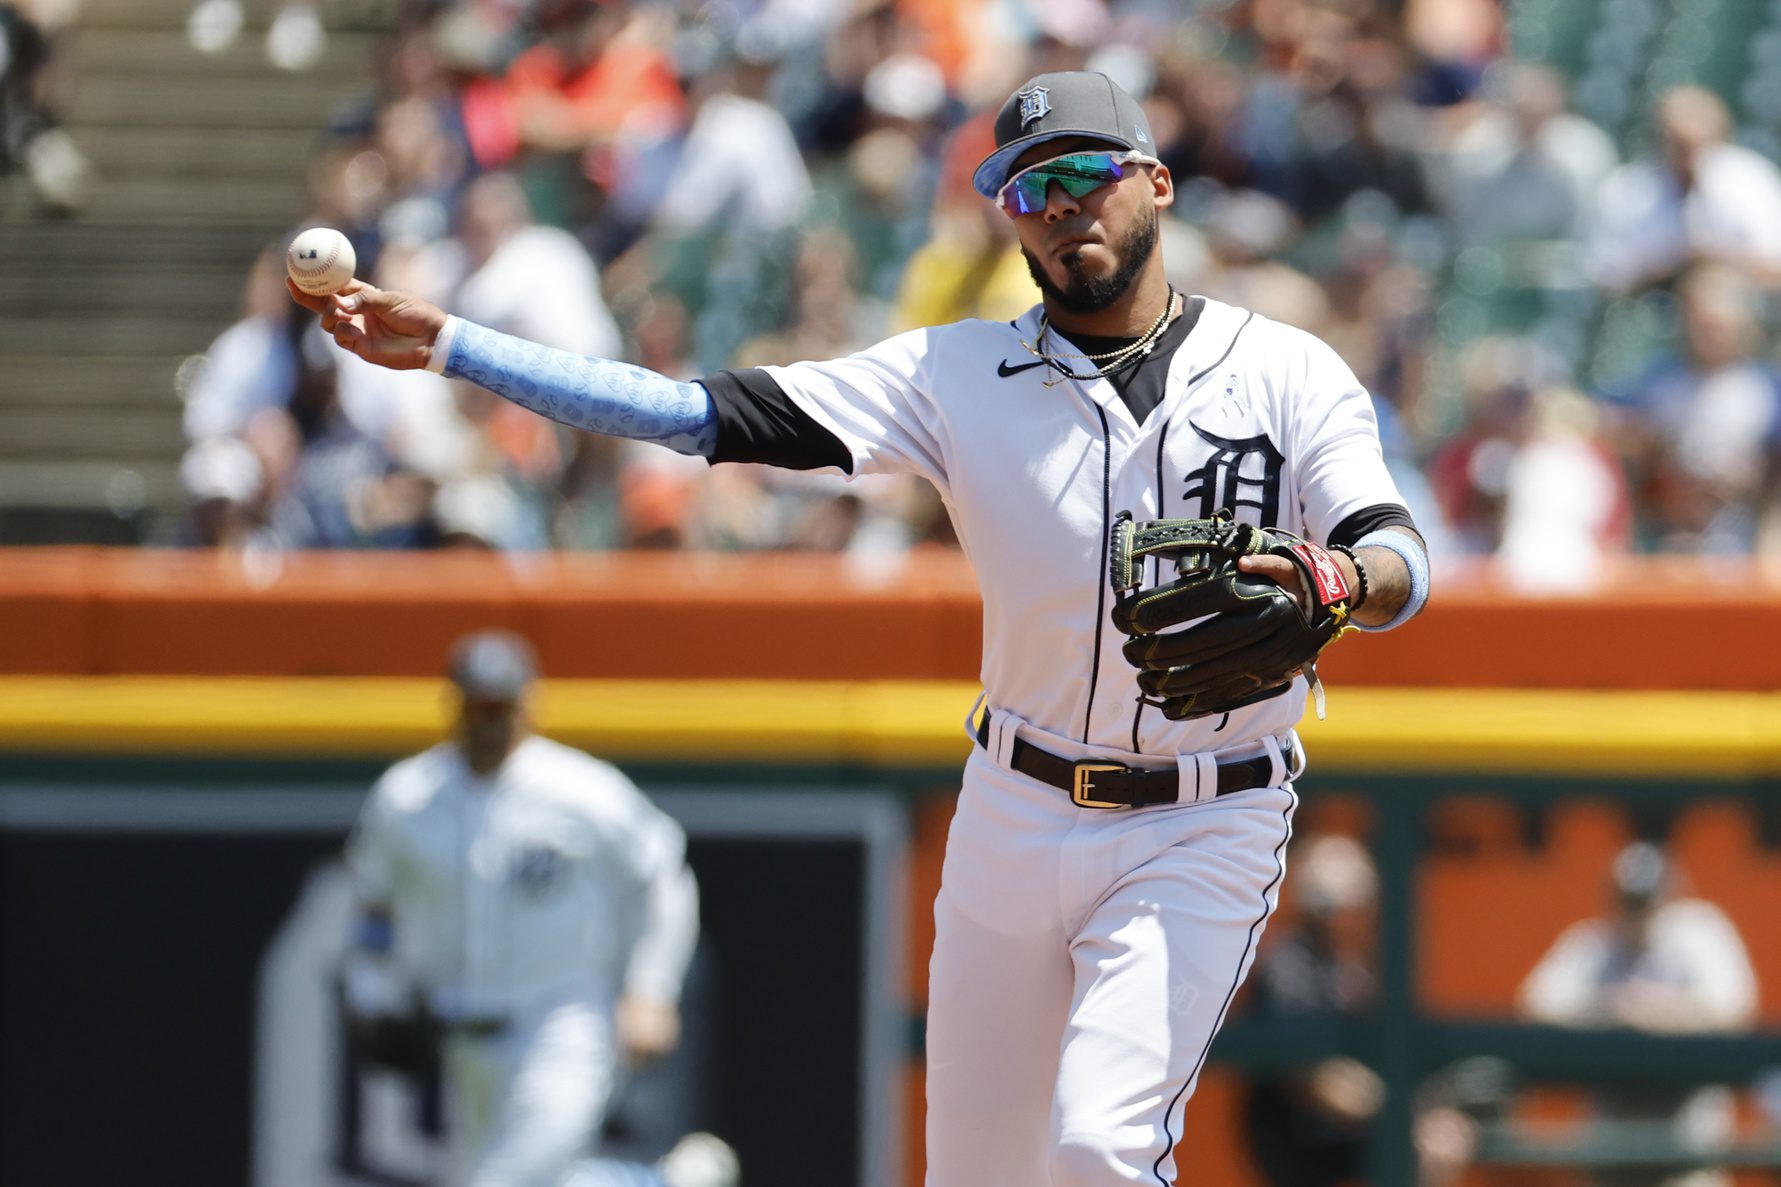 Detroit Tigers third baseman Harold Castro makes a throw to first